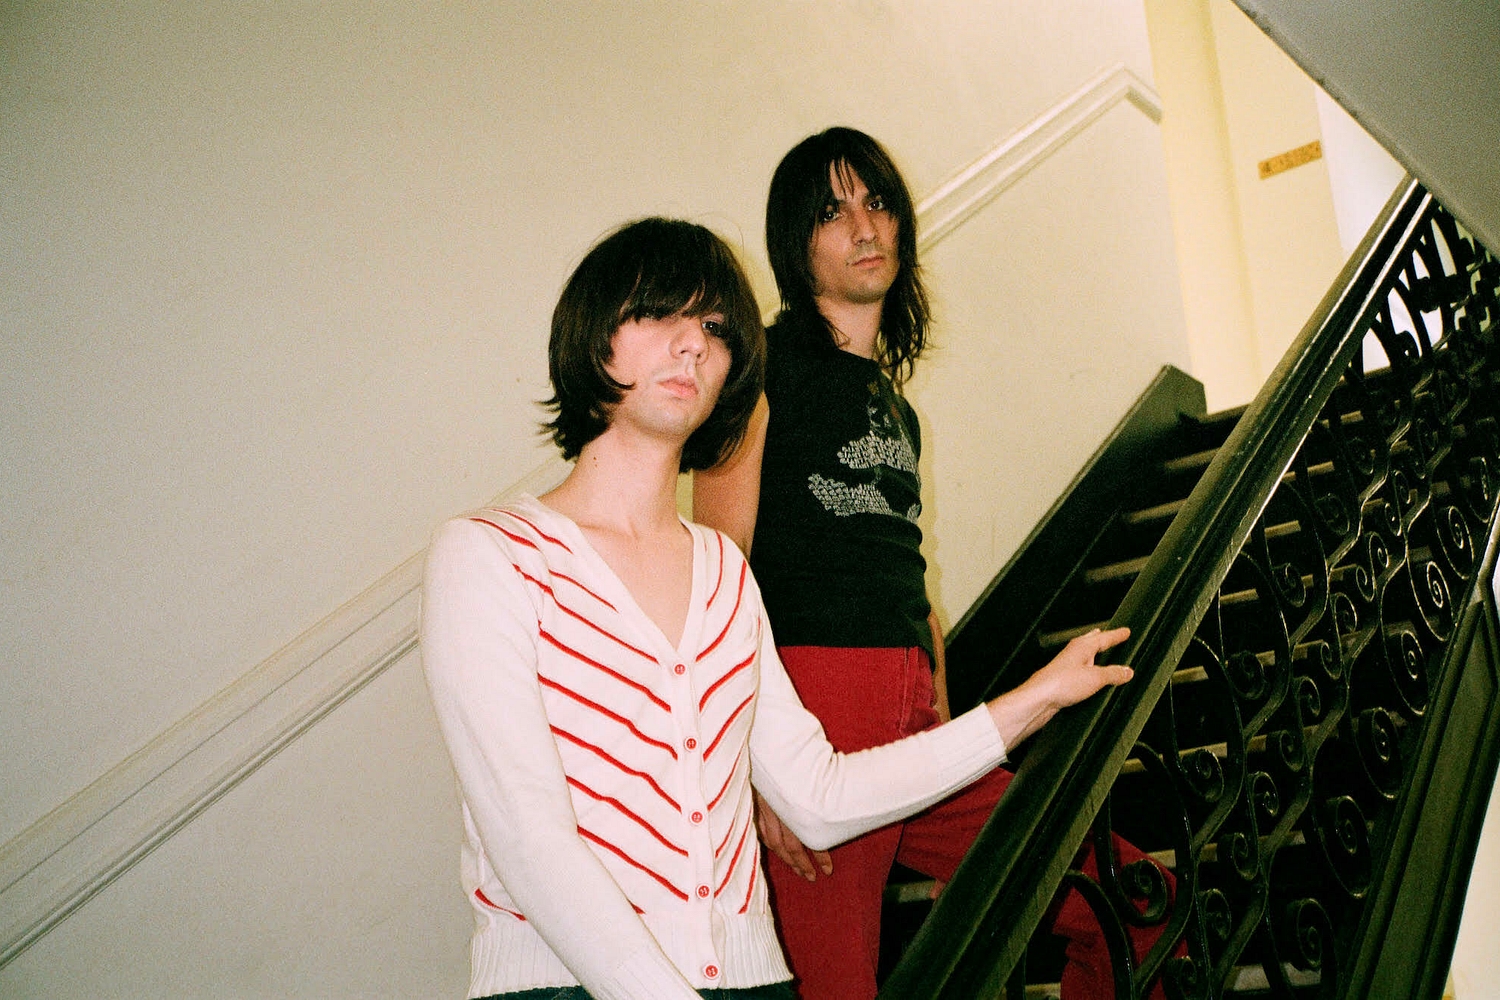 The Lemon Twigs, Heartworms and Kate Davis join London Calling 2023 line-up